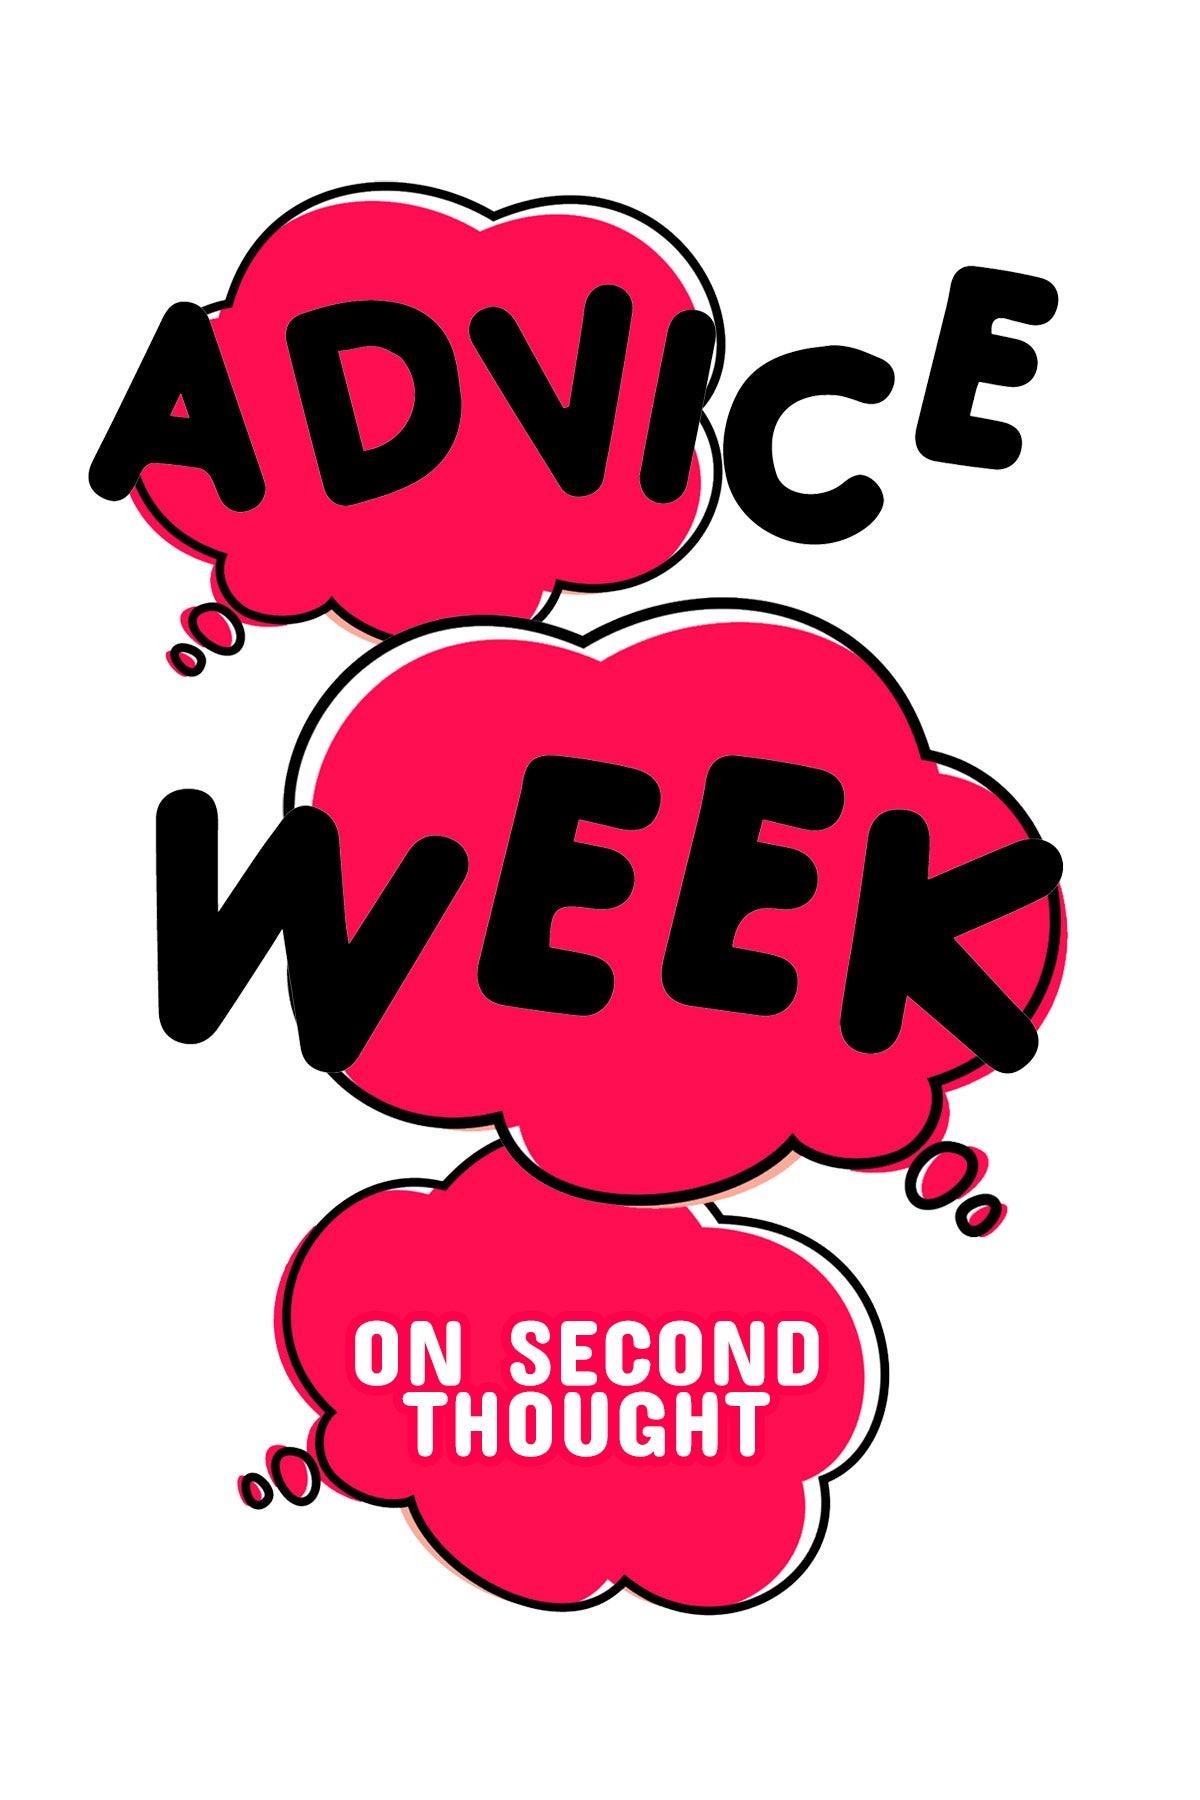 The Advice Week logo with a pink bubble underneath that reads: "On Second Thought."